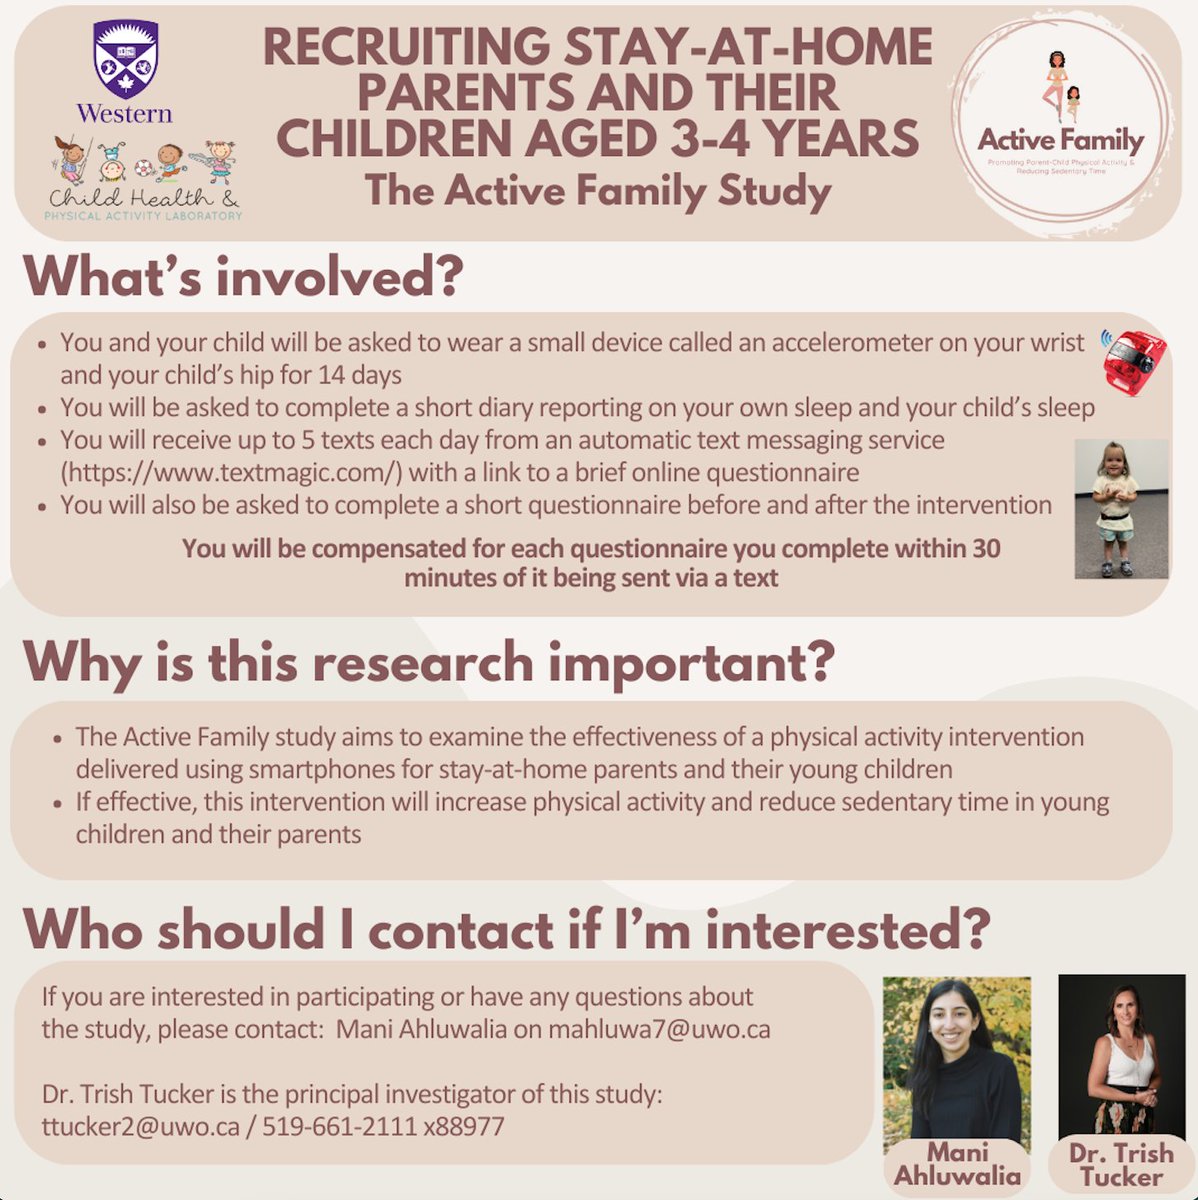 🚨🔊NOW RECRUITING The Child Health and Physical Activity Lab is now recruiting stay-at-home parents and their children aged 3-4 years for The Active Family Study! 🤸 Please contact Mani Ahluwalia at mahluwa7@uwo.ca or Dr. Trish Tucker at ttucker2@uwo.ca if you are interested